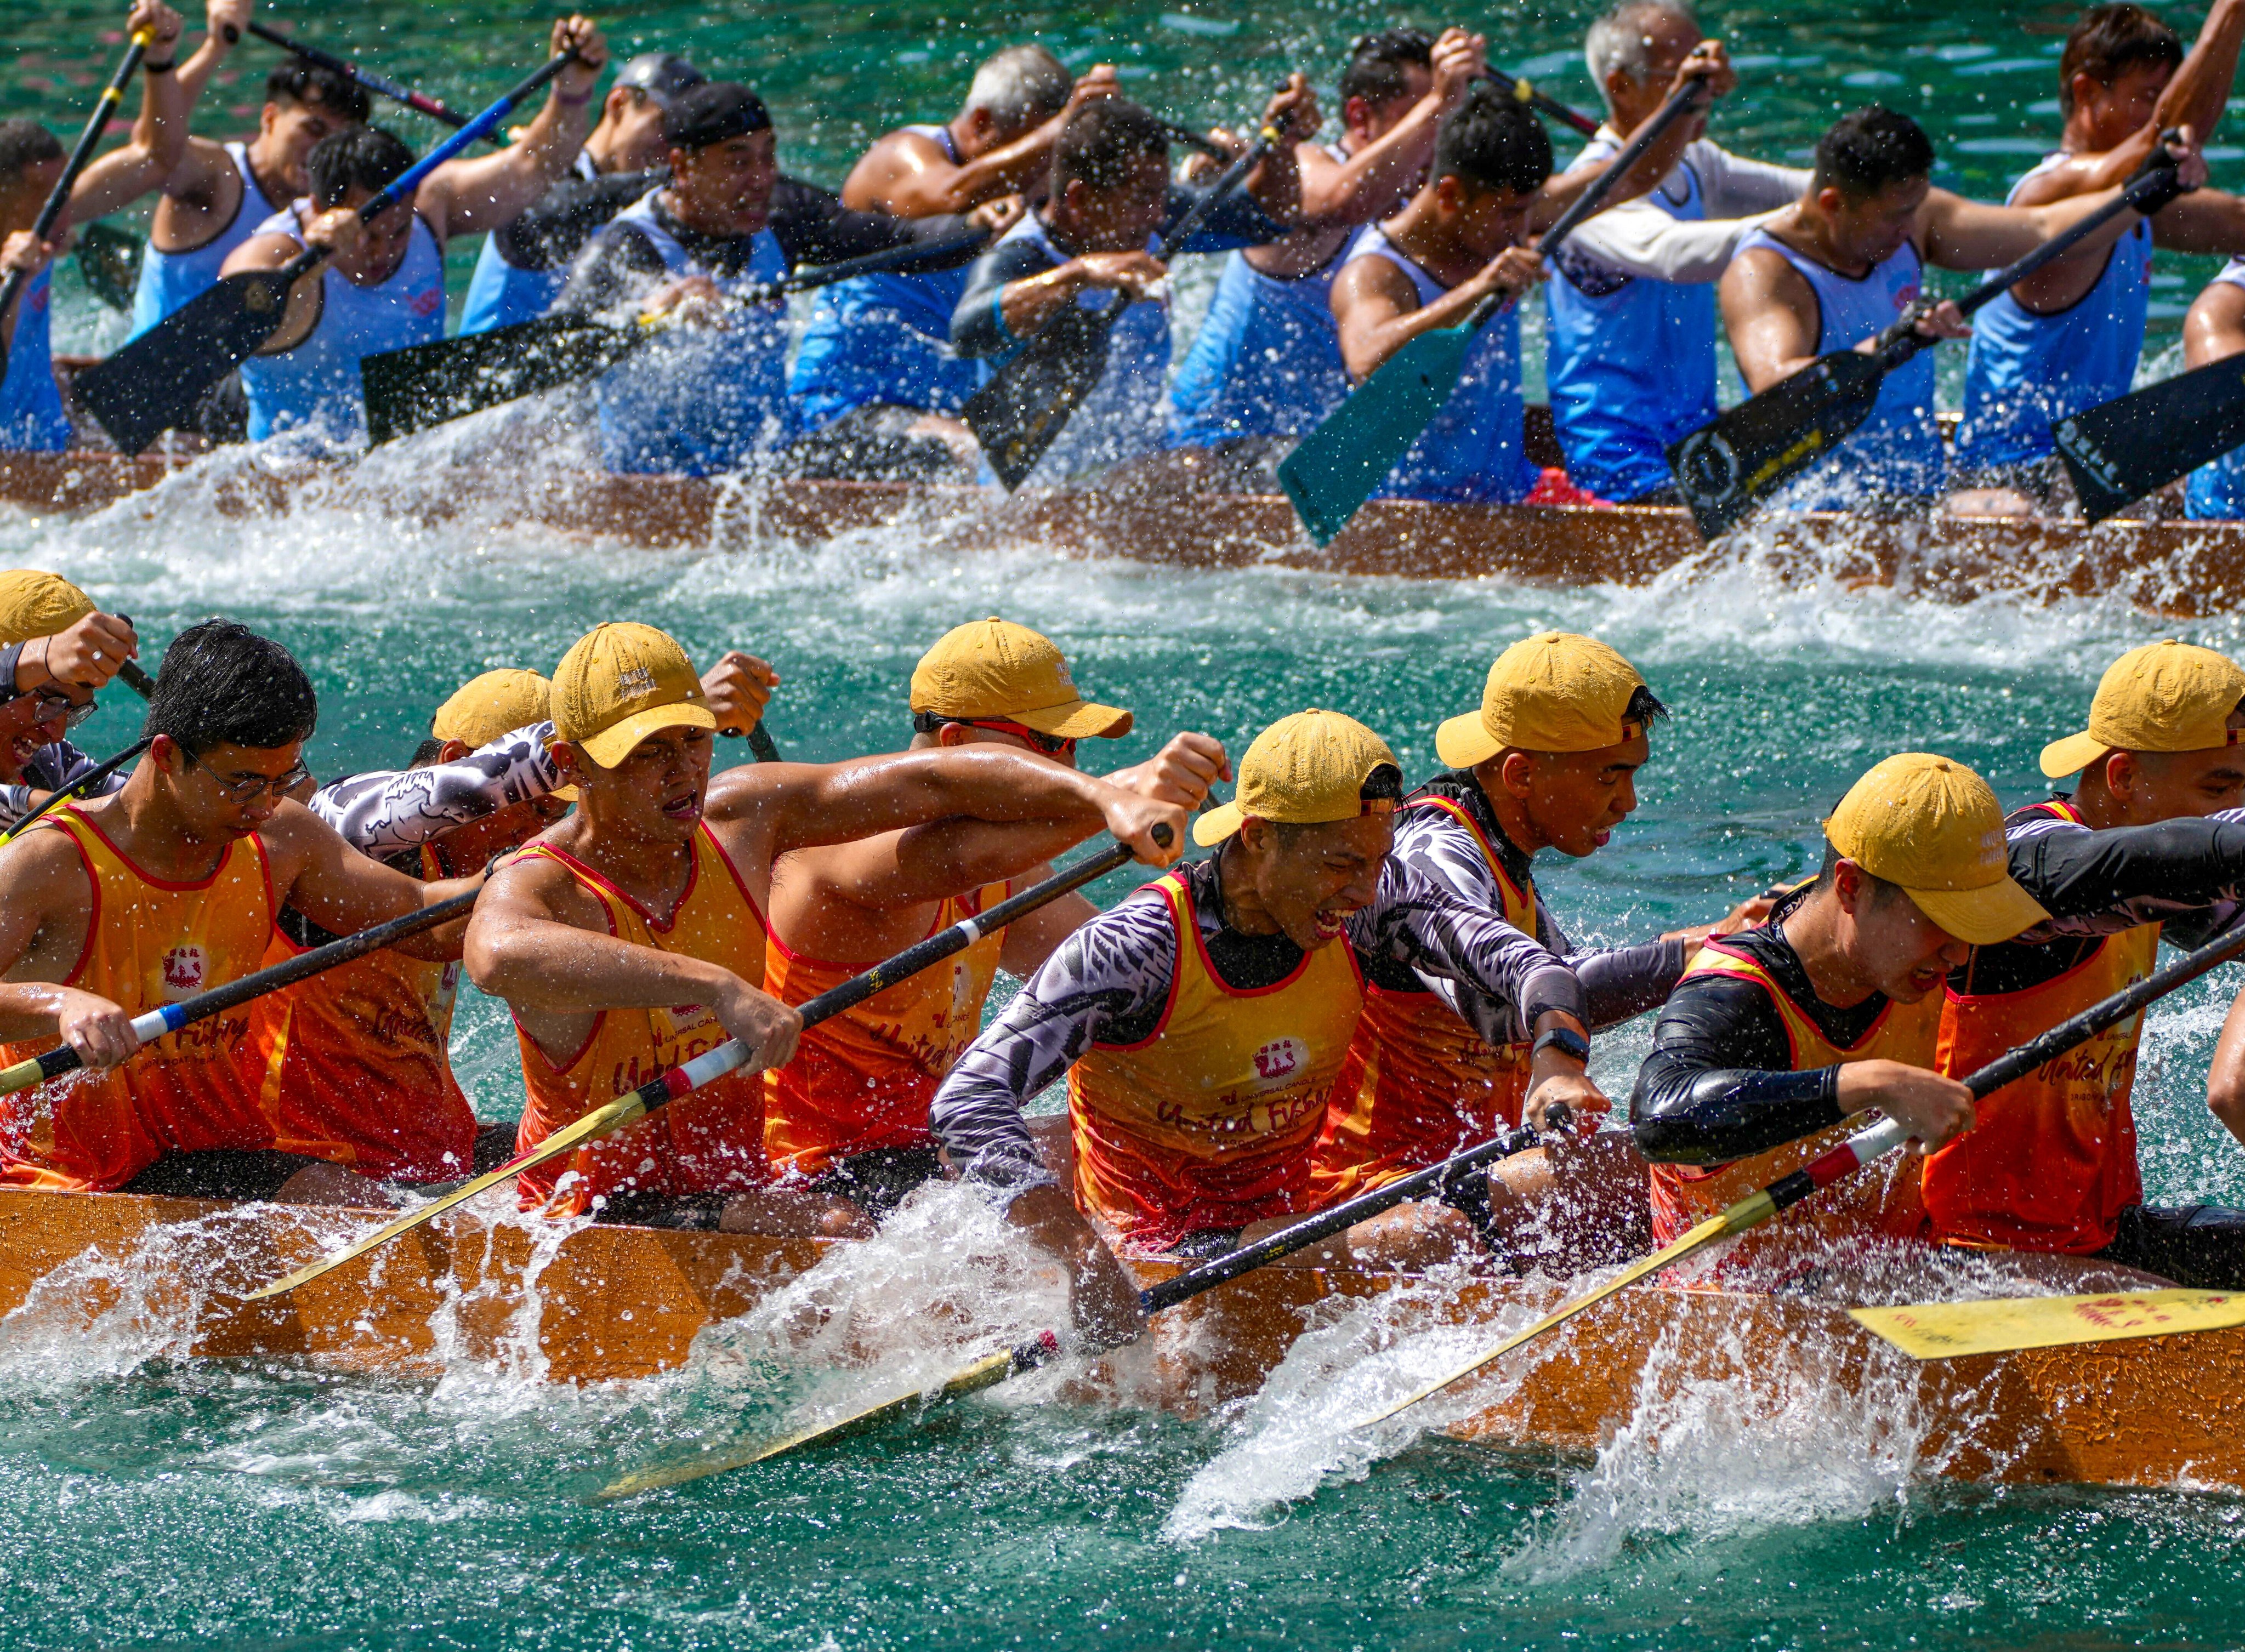 Contestants battle it out during the festival’s dragon boat races. Photo: Sam Tsang